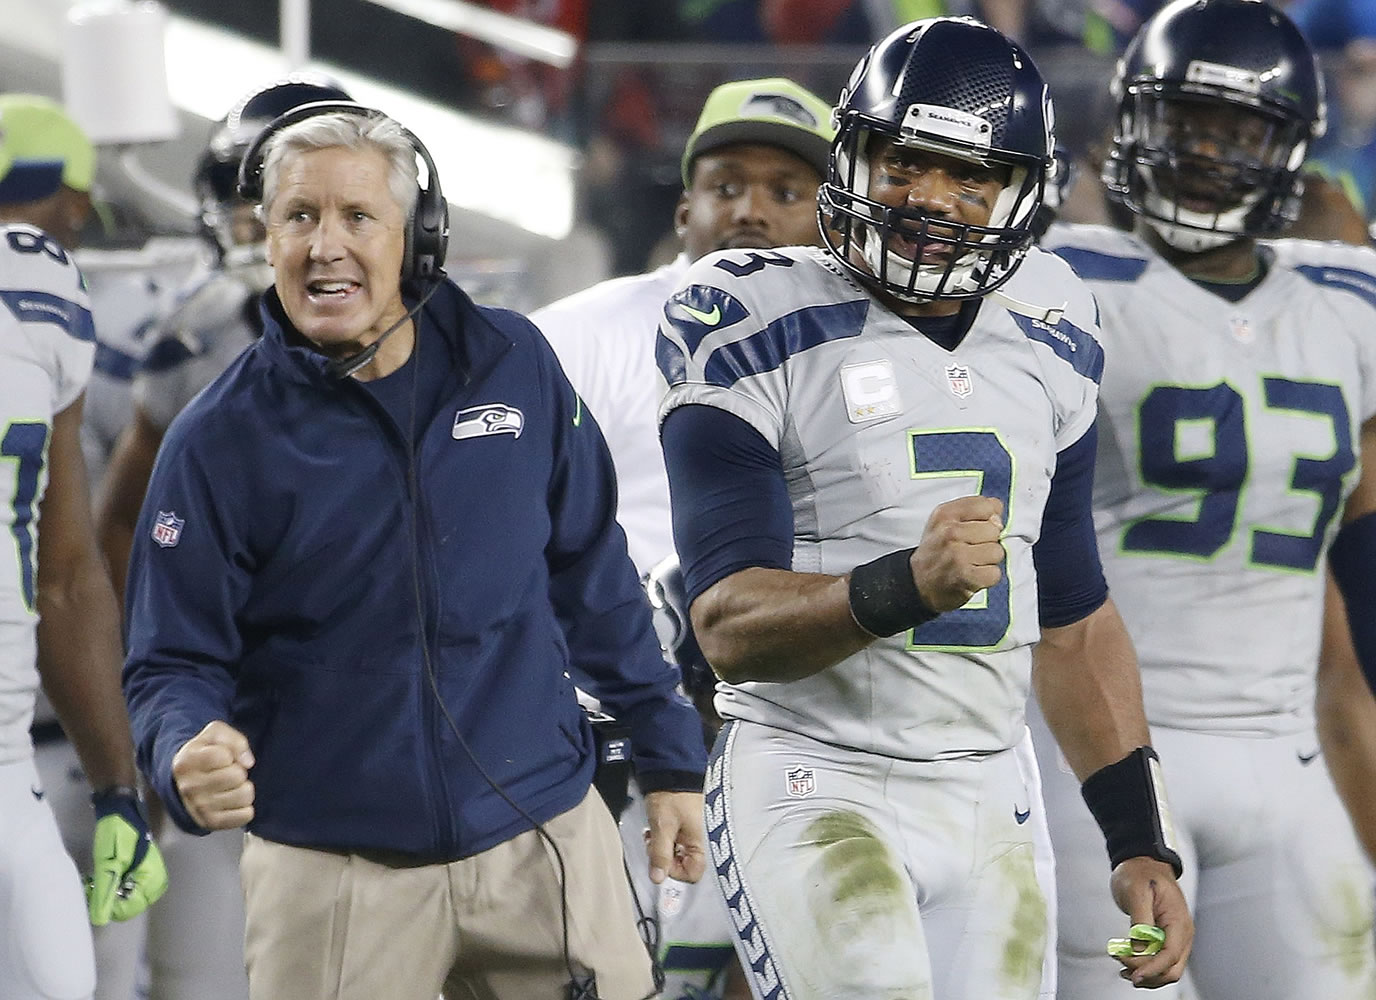 Seattle Seahawks head coach Pete Carroll, left, and quarterback Russell Wilson (3) celebrate during the fourth quarter of an NFL football game against the San Francisco 49ers in Santa Clara, Calif., Thursday, Nov. 27, 2014.